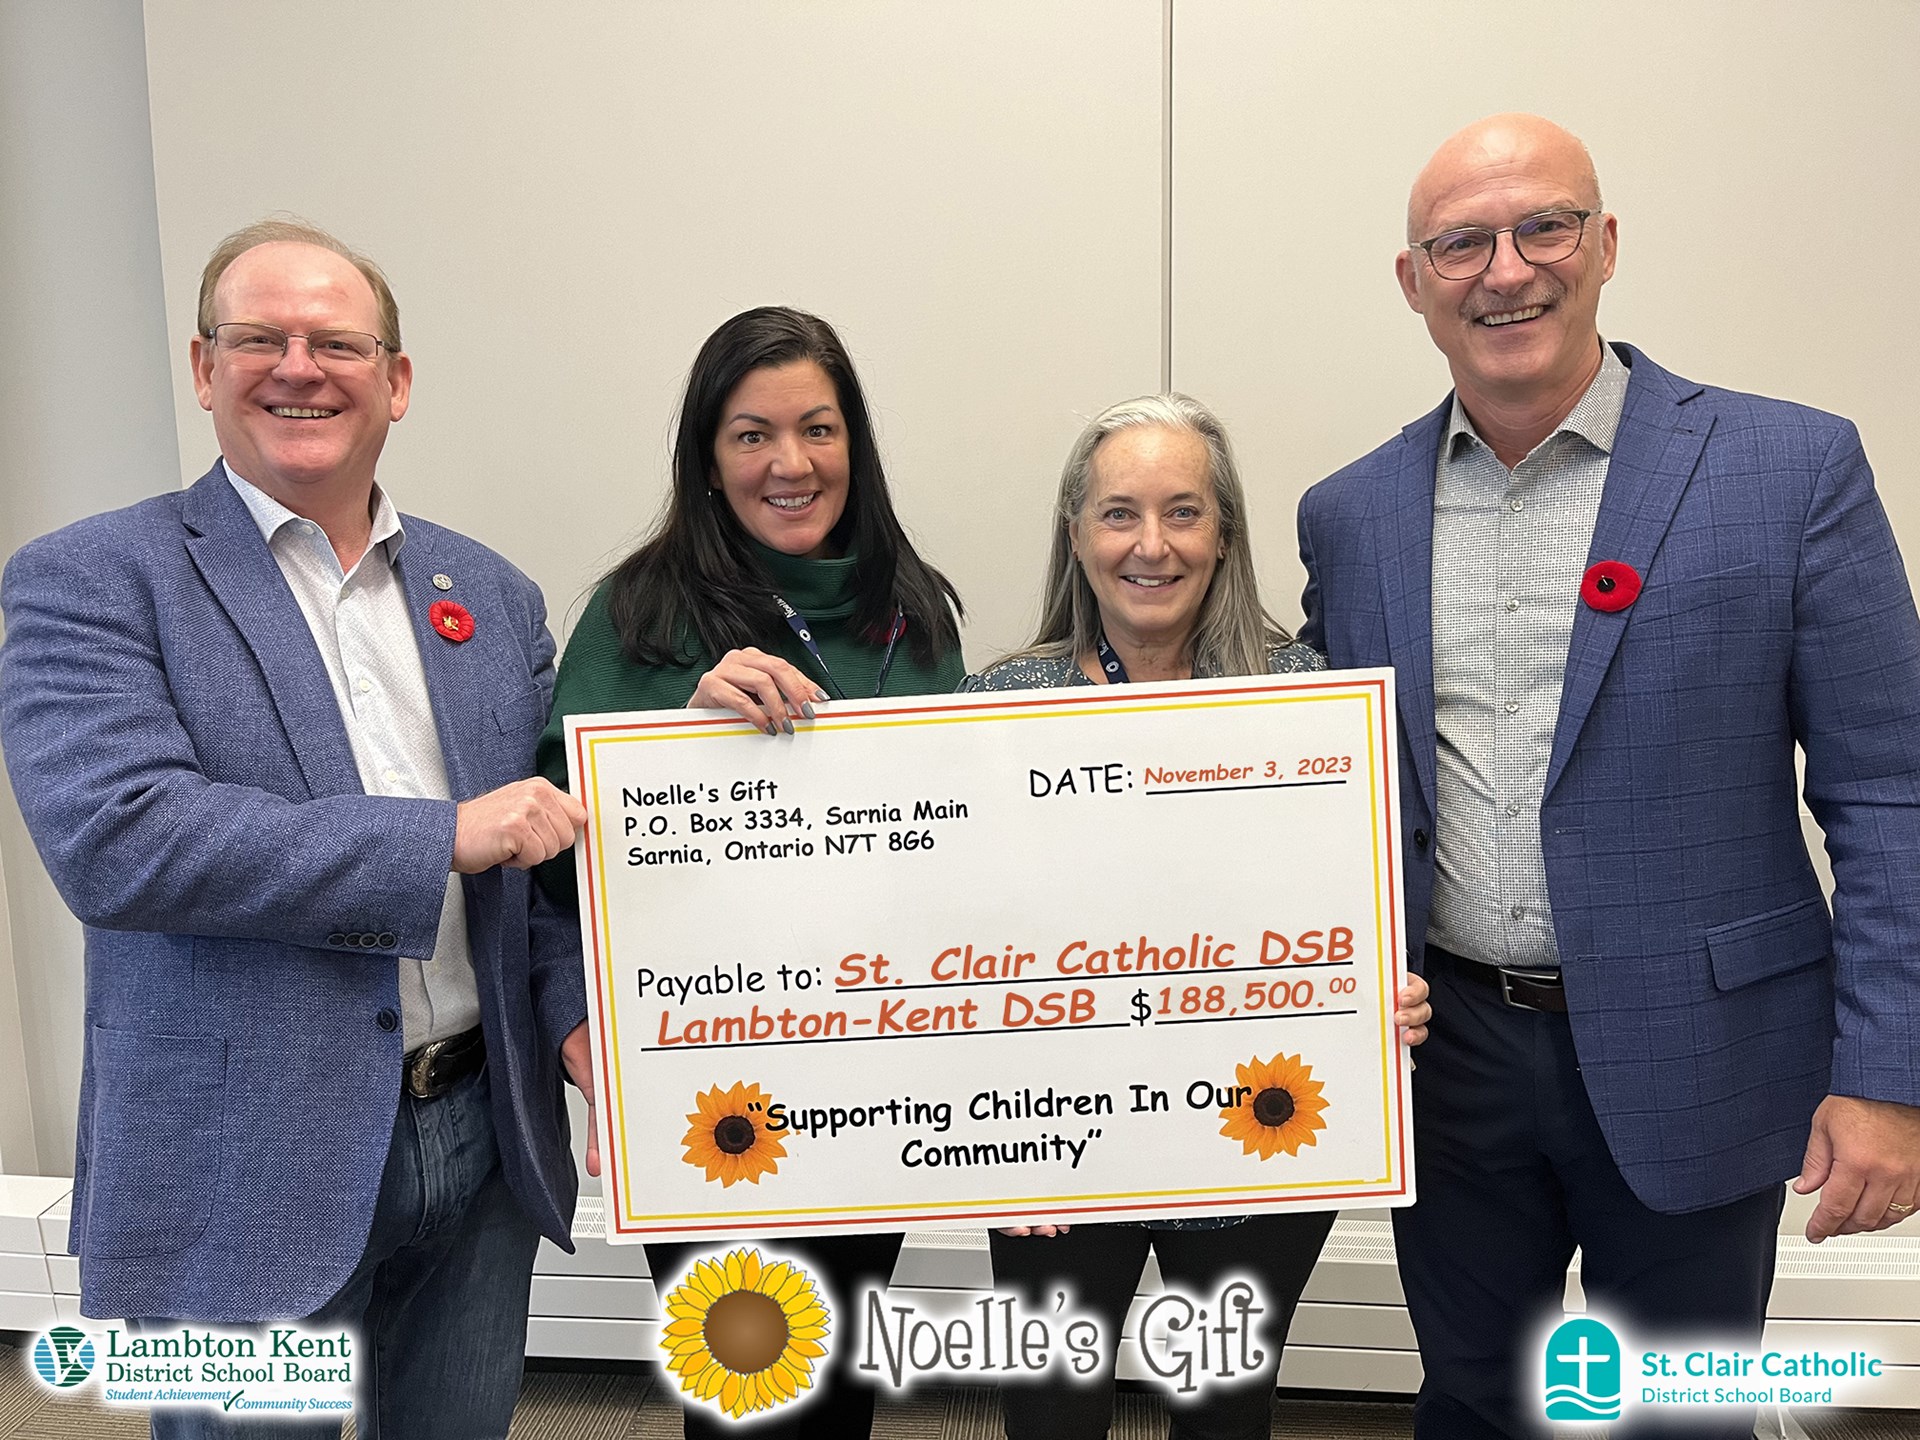 Noelle's Gift Cheque Presentation 2023 with Logos.jpg